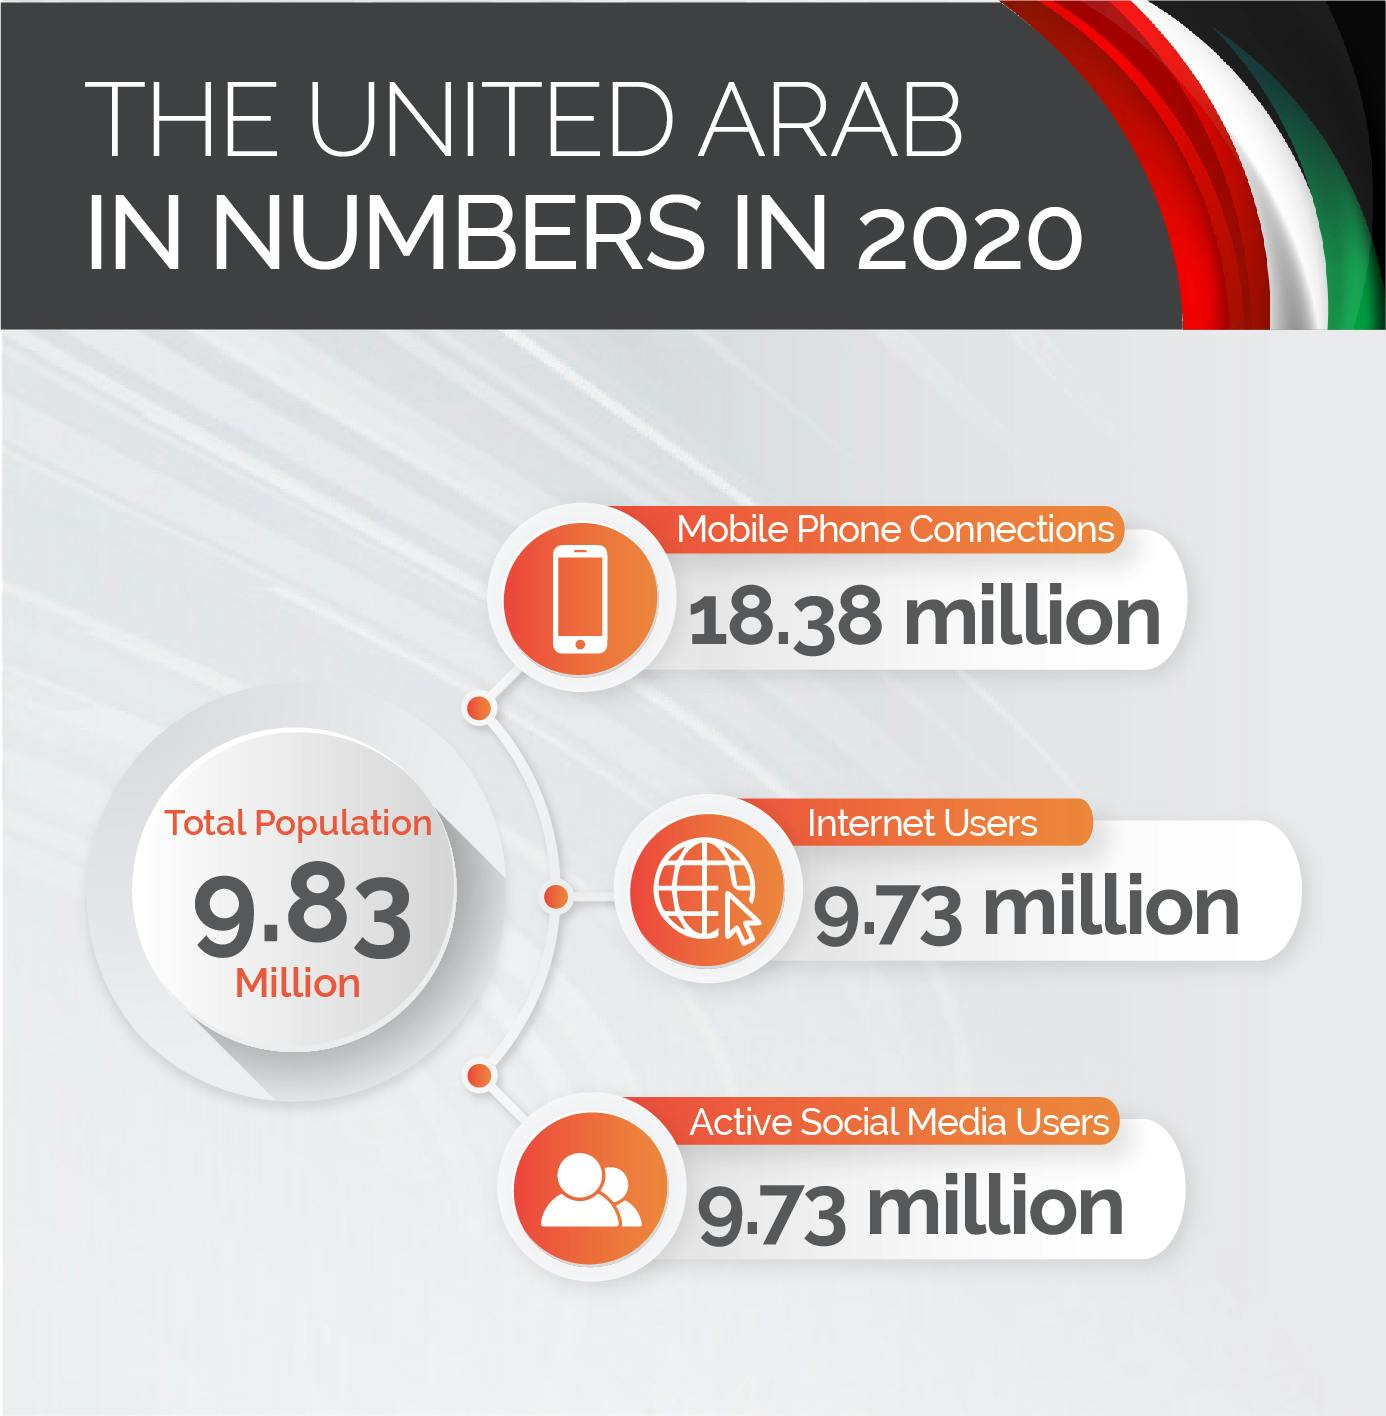 UAE stats for 2020